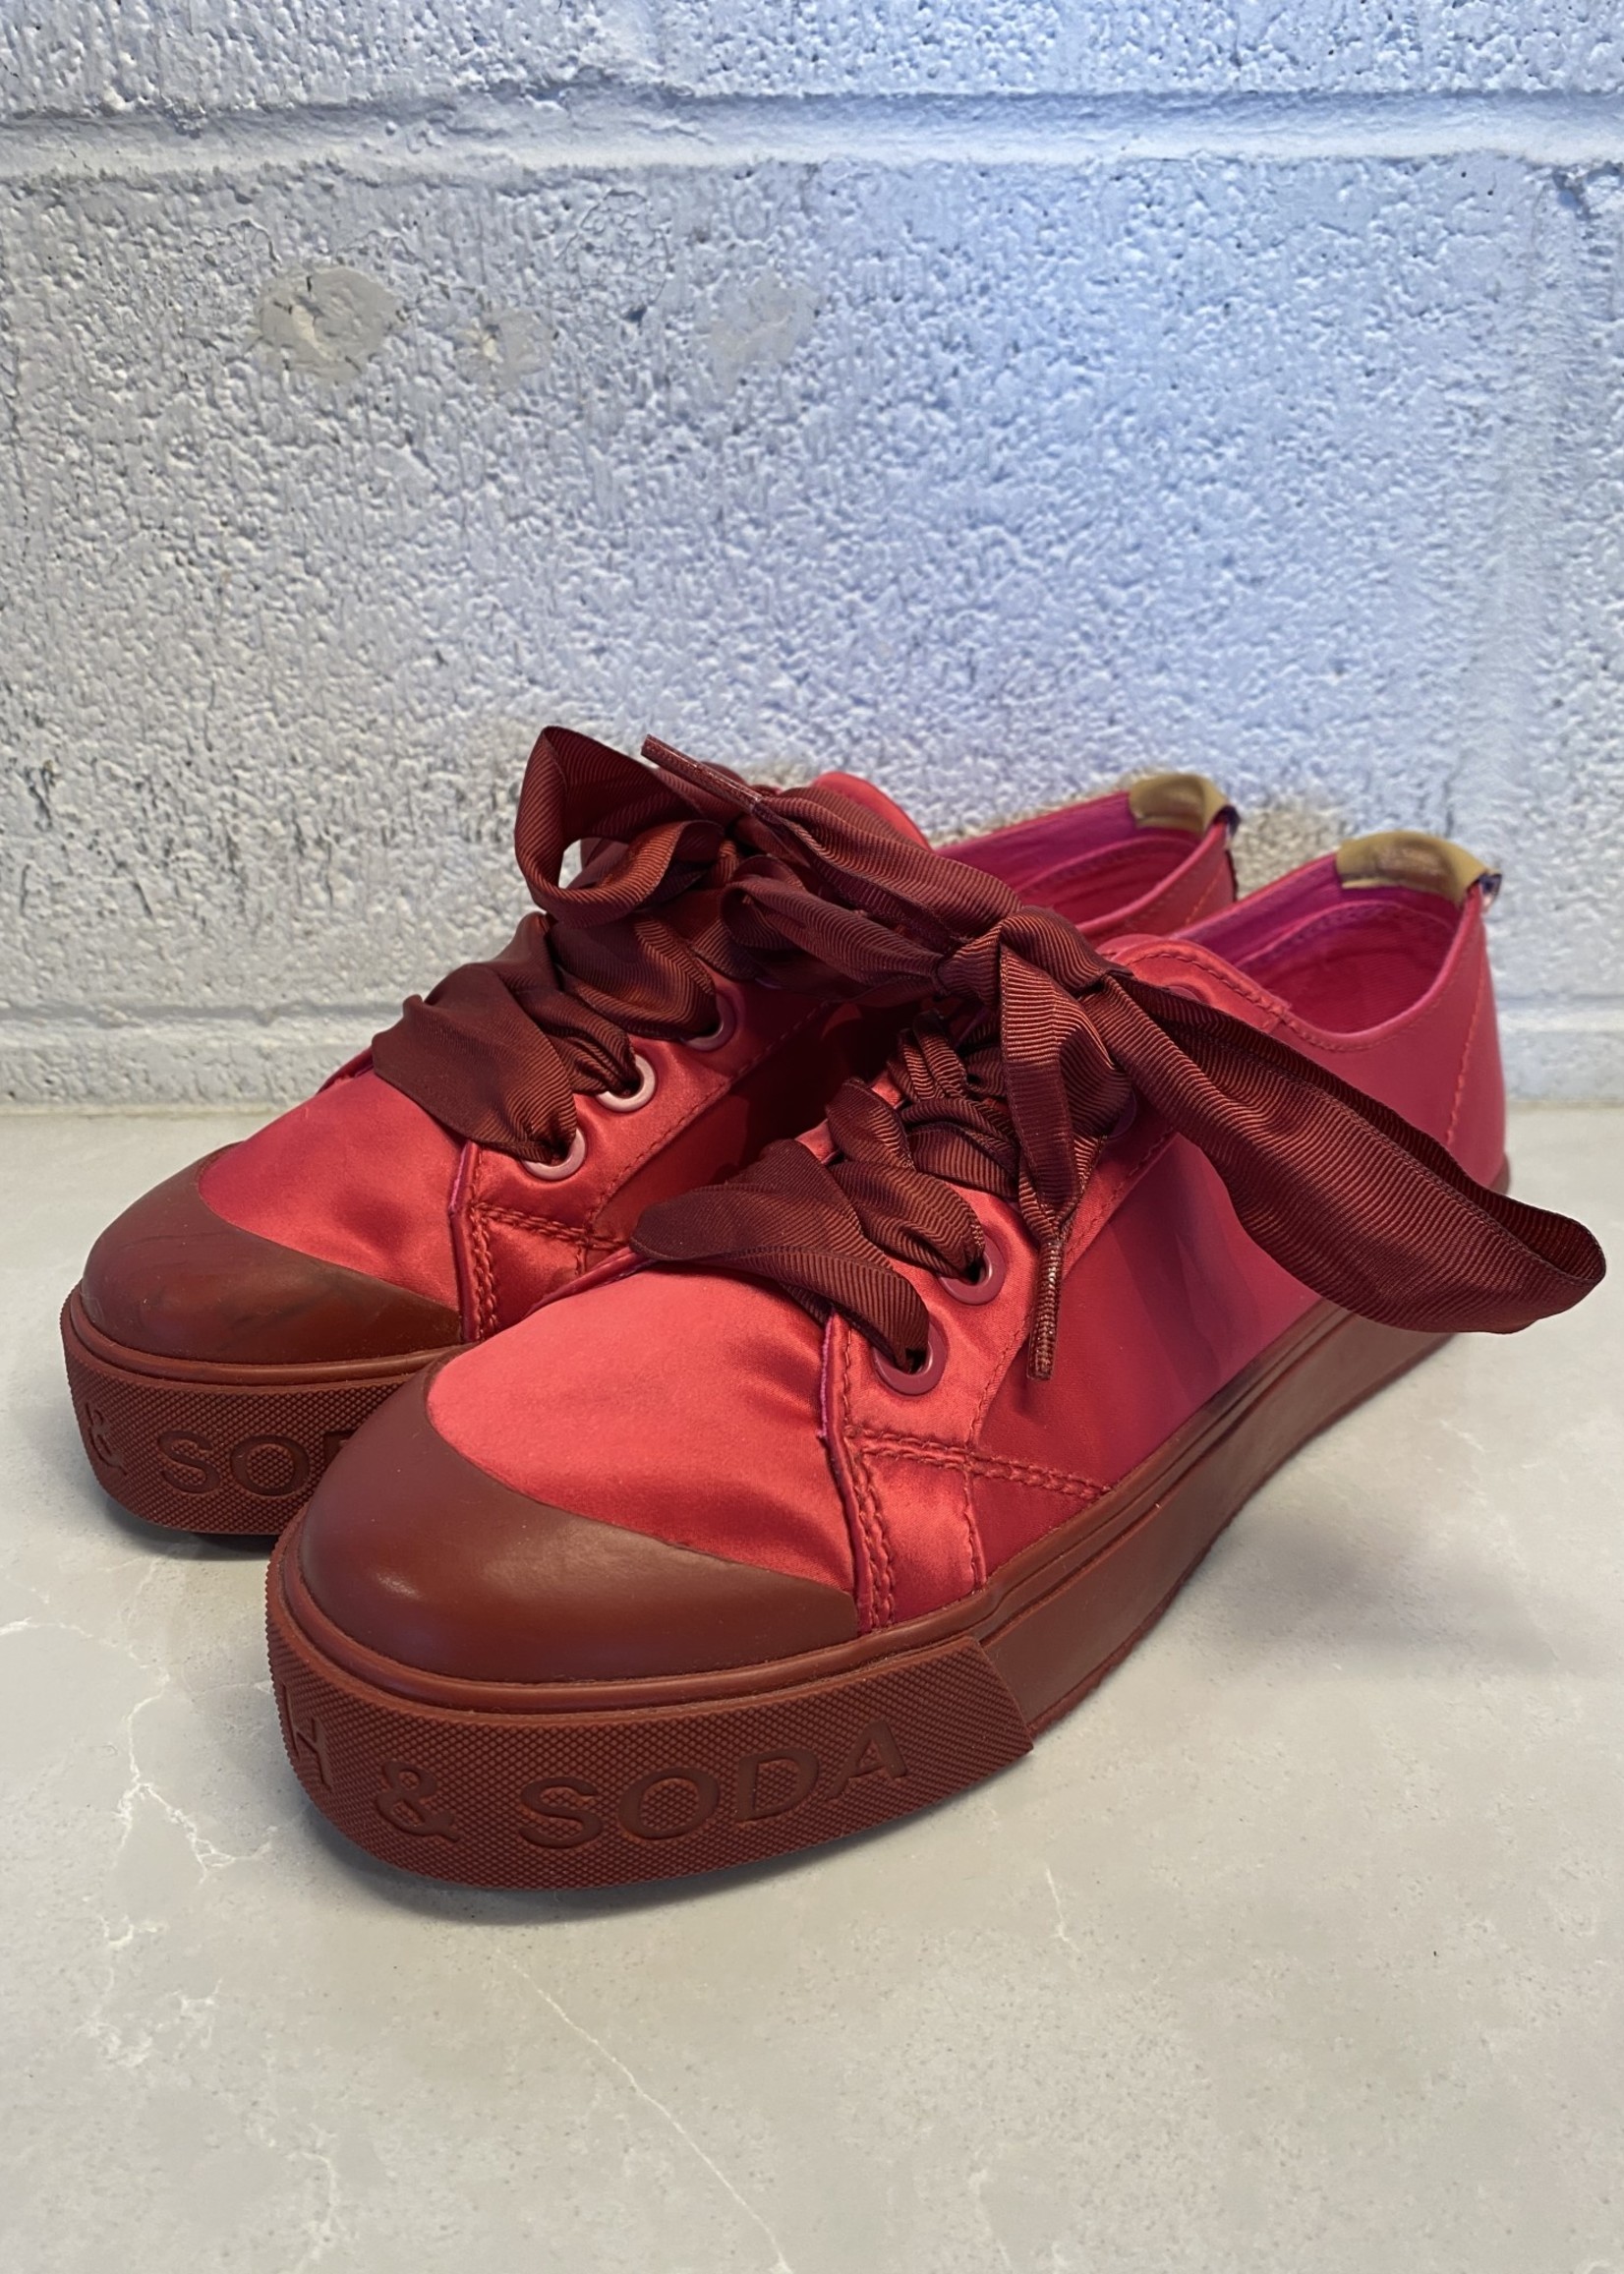 Scotch & Soda Hot Pink Silky Lace Sneakers 8.5